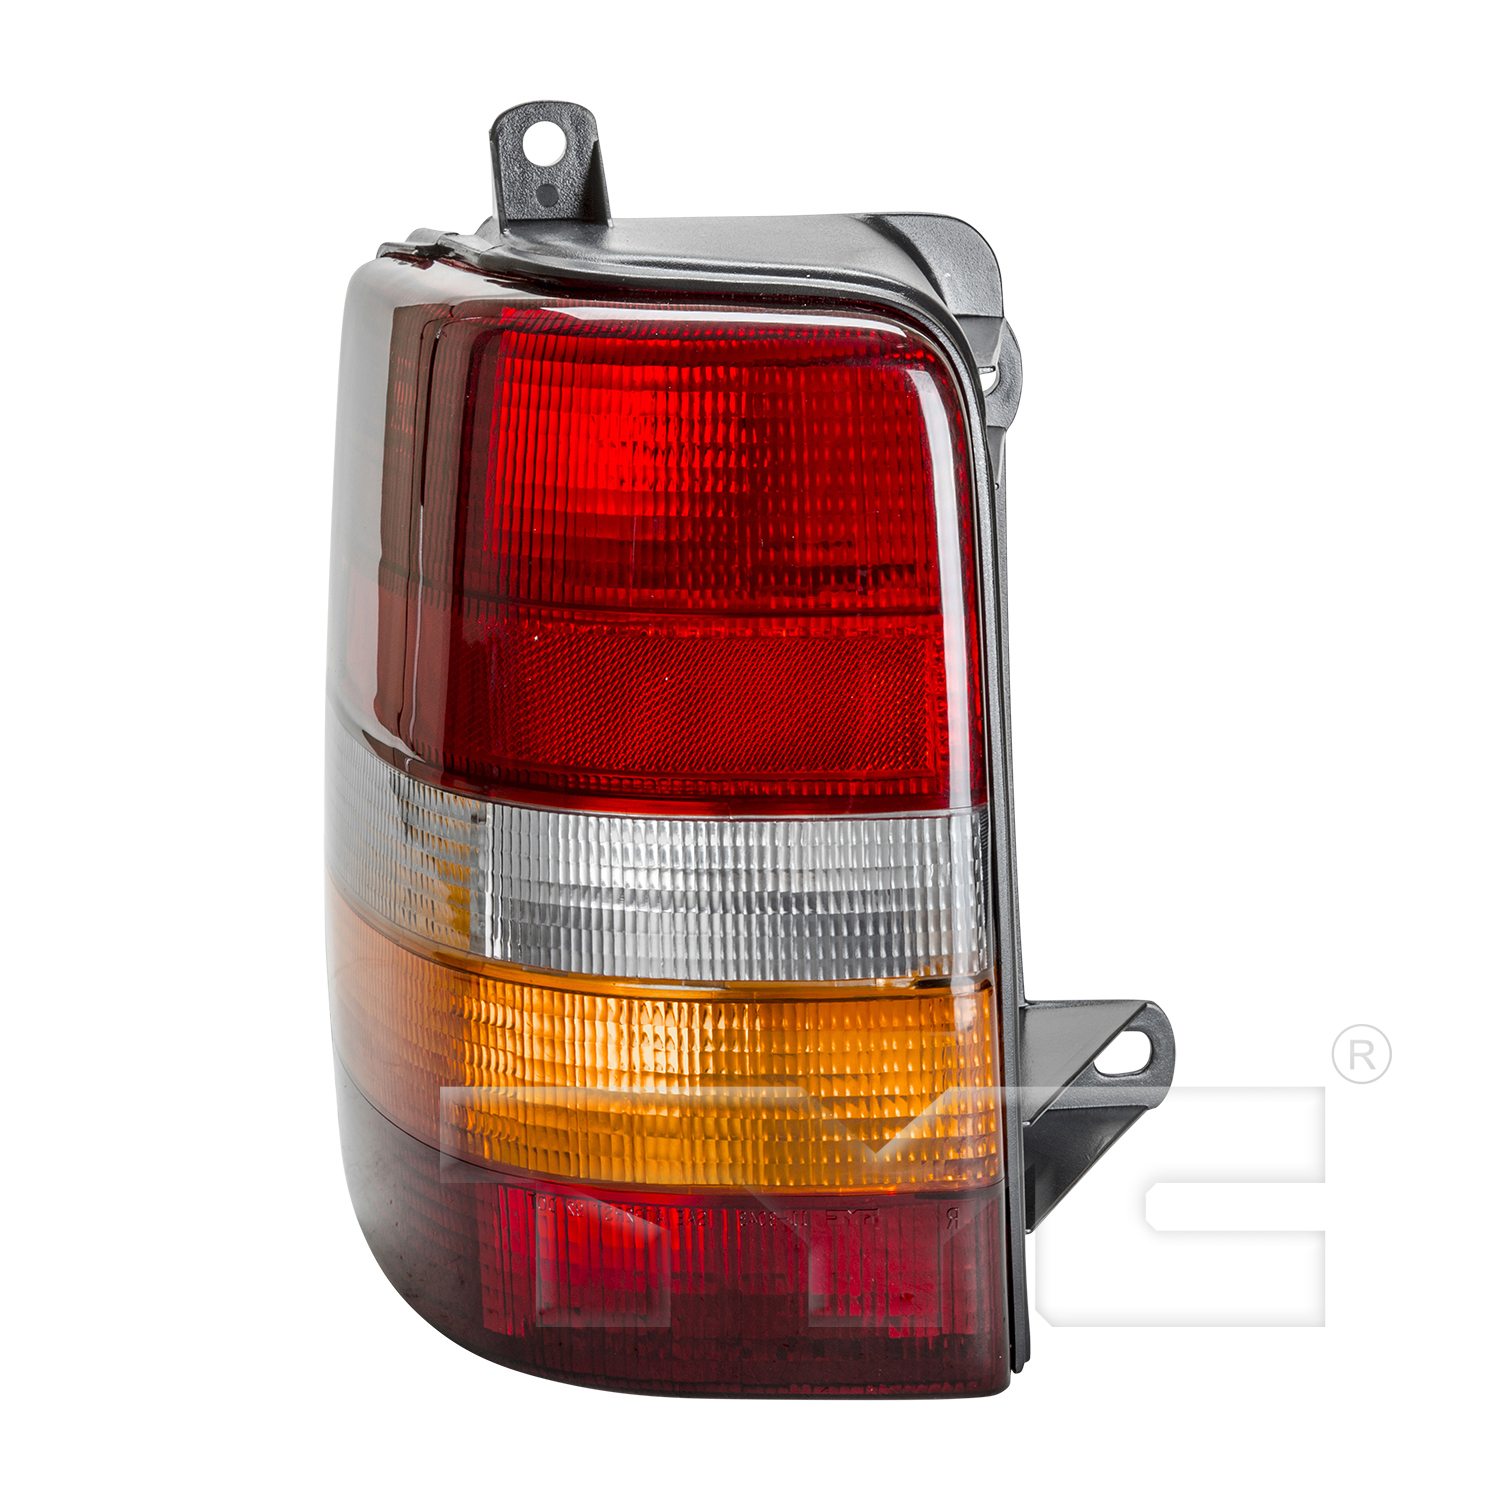 Aftermarket TAILLIGHTS for JEEP - GRAND CHEROKEE, GRAND CHEROKEE,93-98,LT Taillamp assy